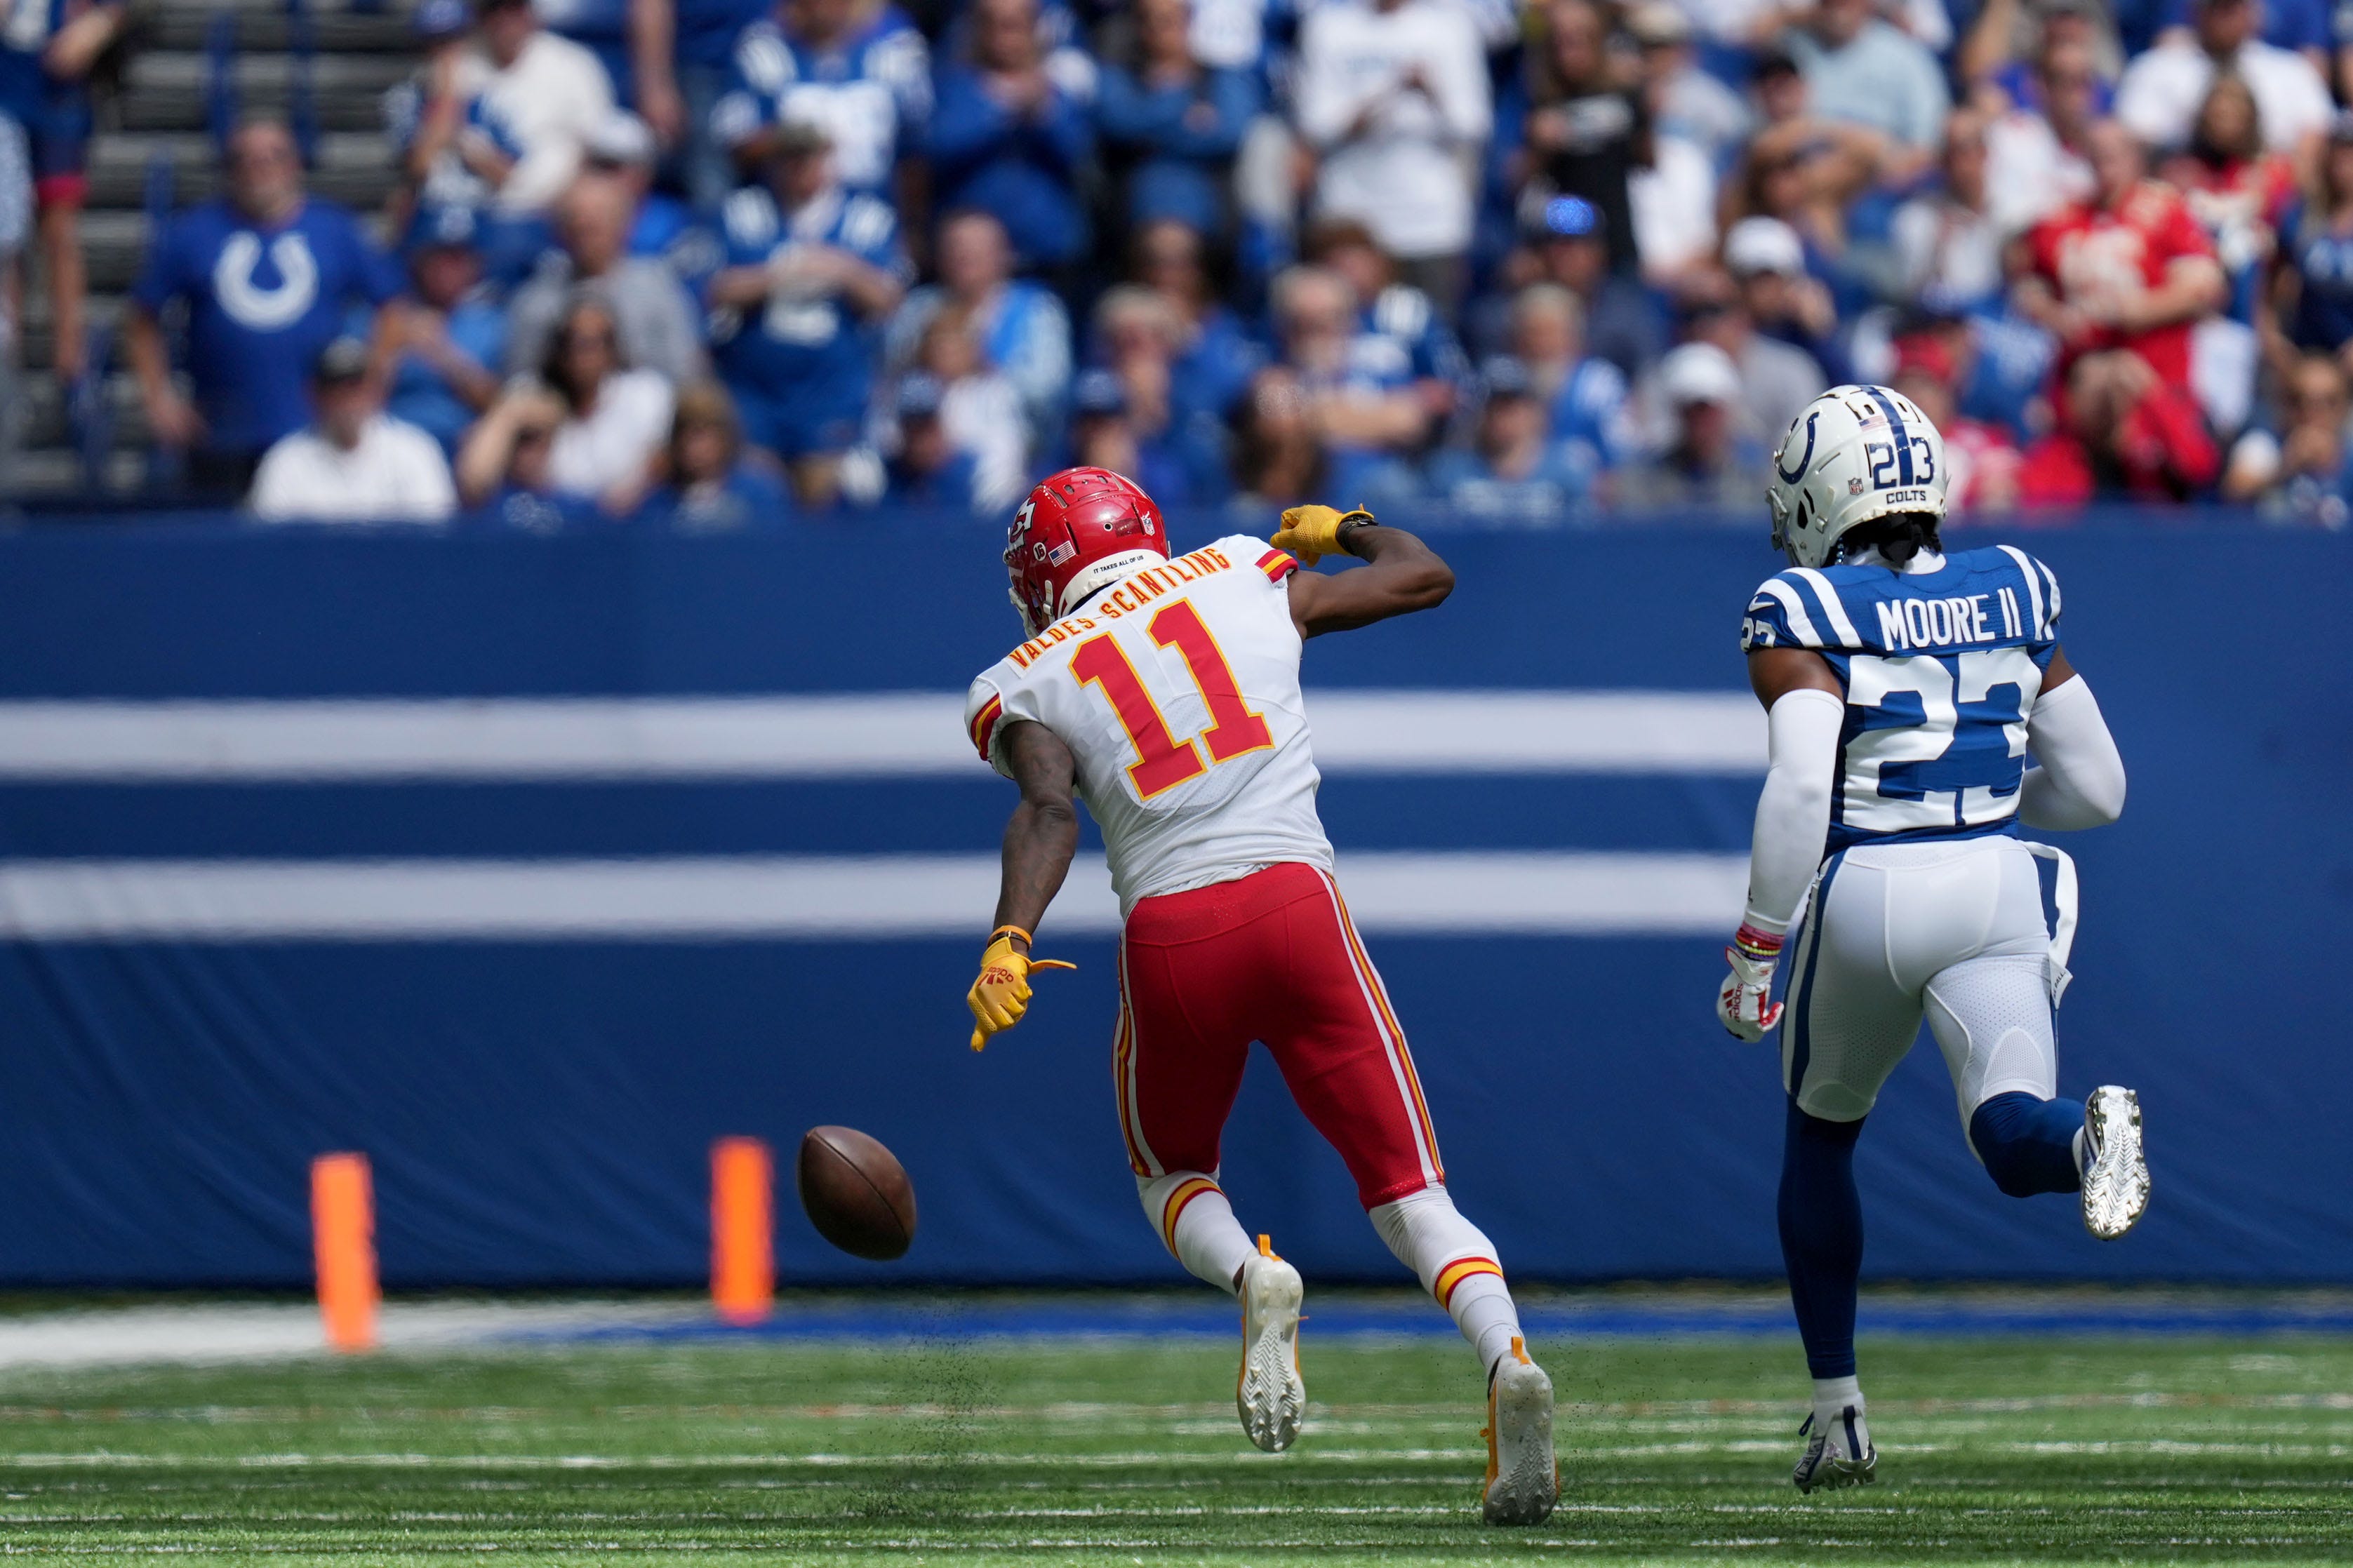 A&nbsp;pass intended for Kansas City Chiefs wide receiver Marquez Valdes-Scantling (11) goes incomplete while under pressure by Indianapolis Colts cornerback Kenny Moore II (23) on Sunday, Sept. 25, 2022, during a game against the Kansas City Chiefs at Lucas Oil Stadium in Indianapolis.